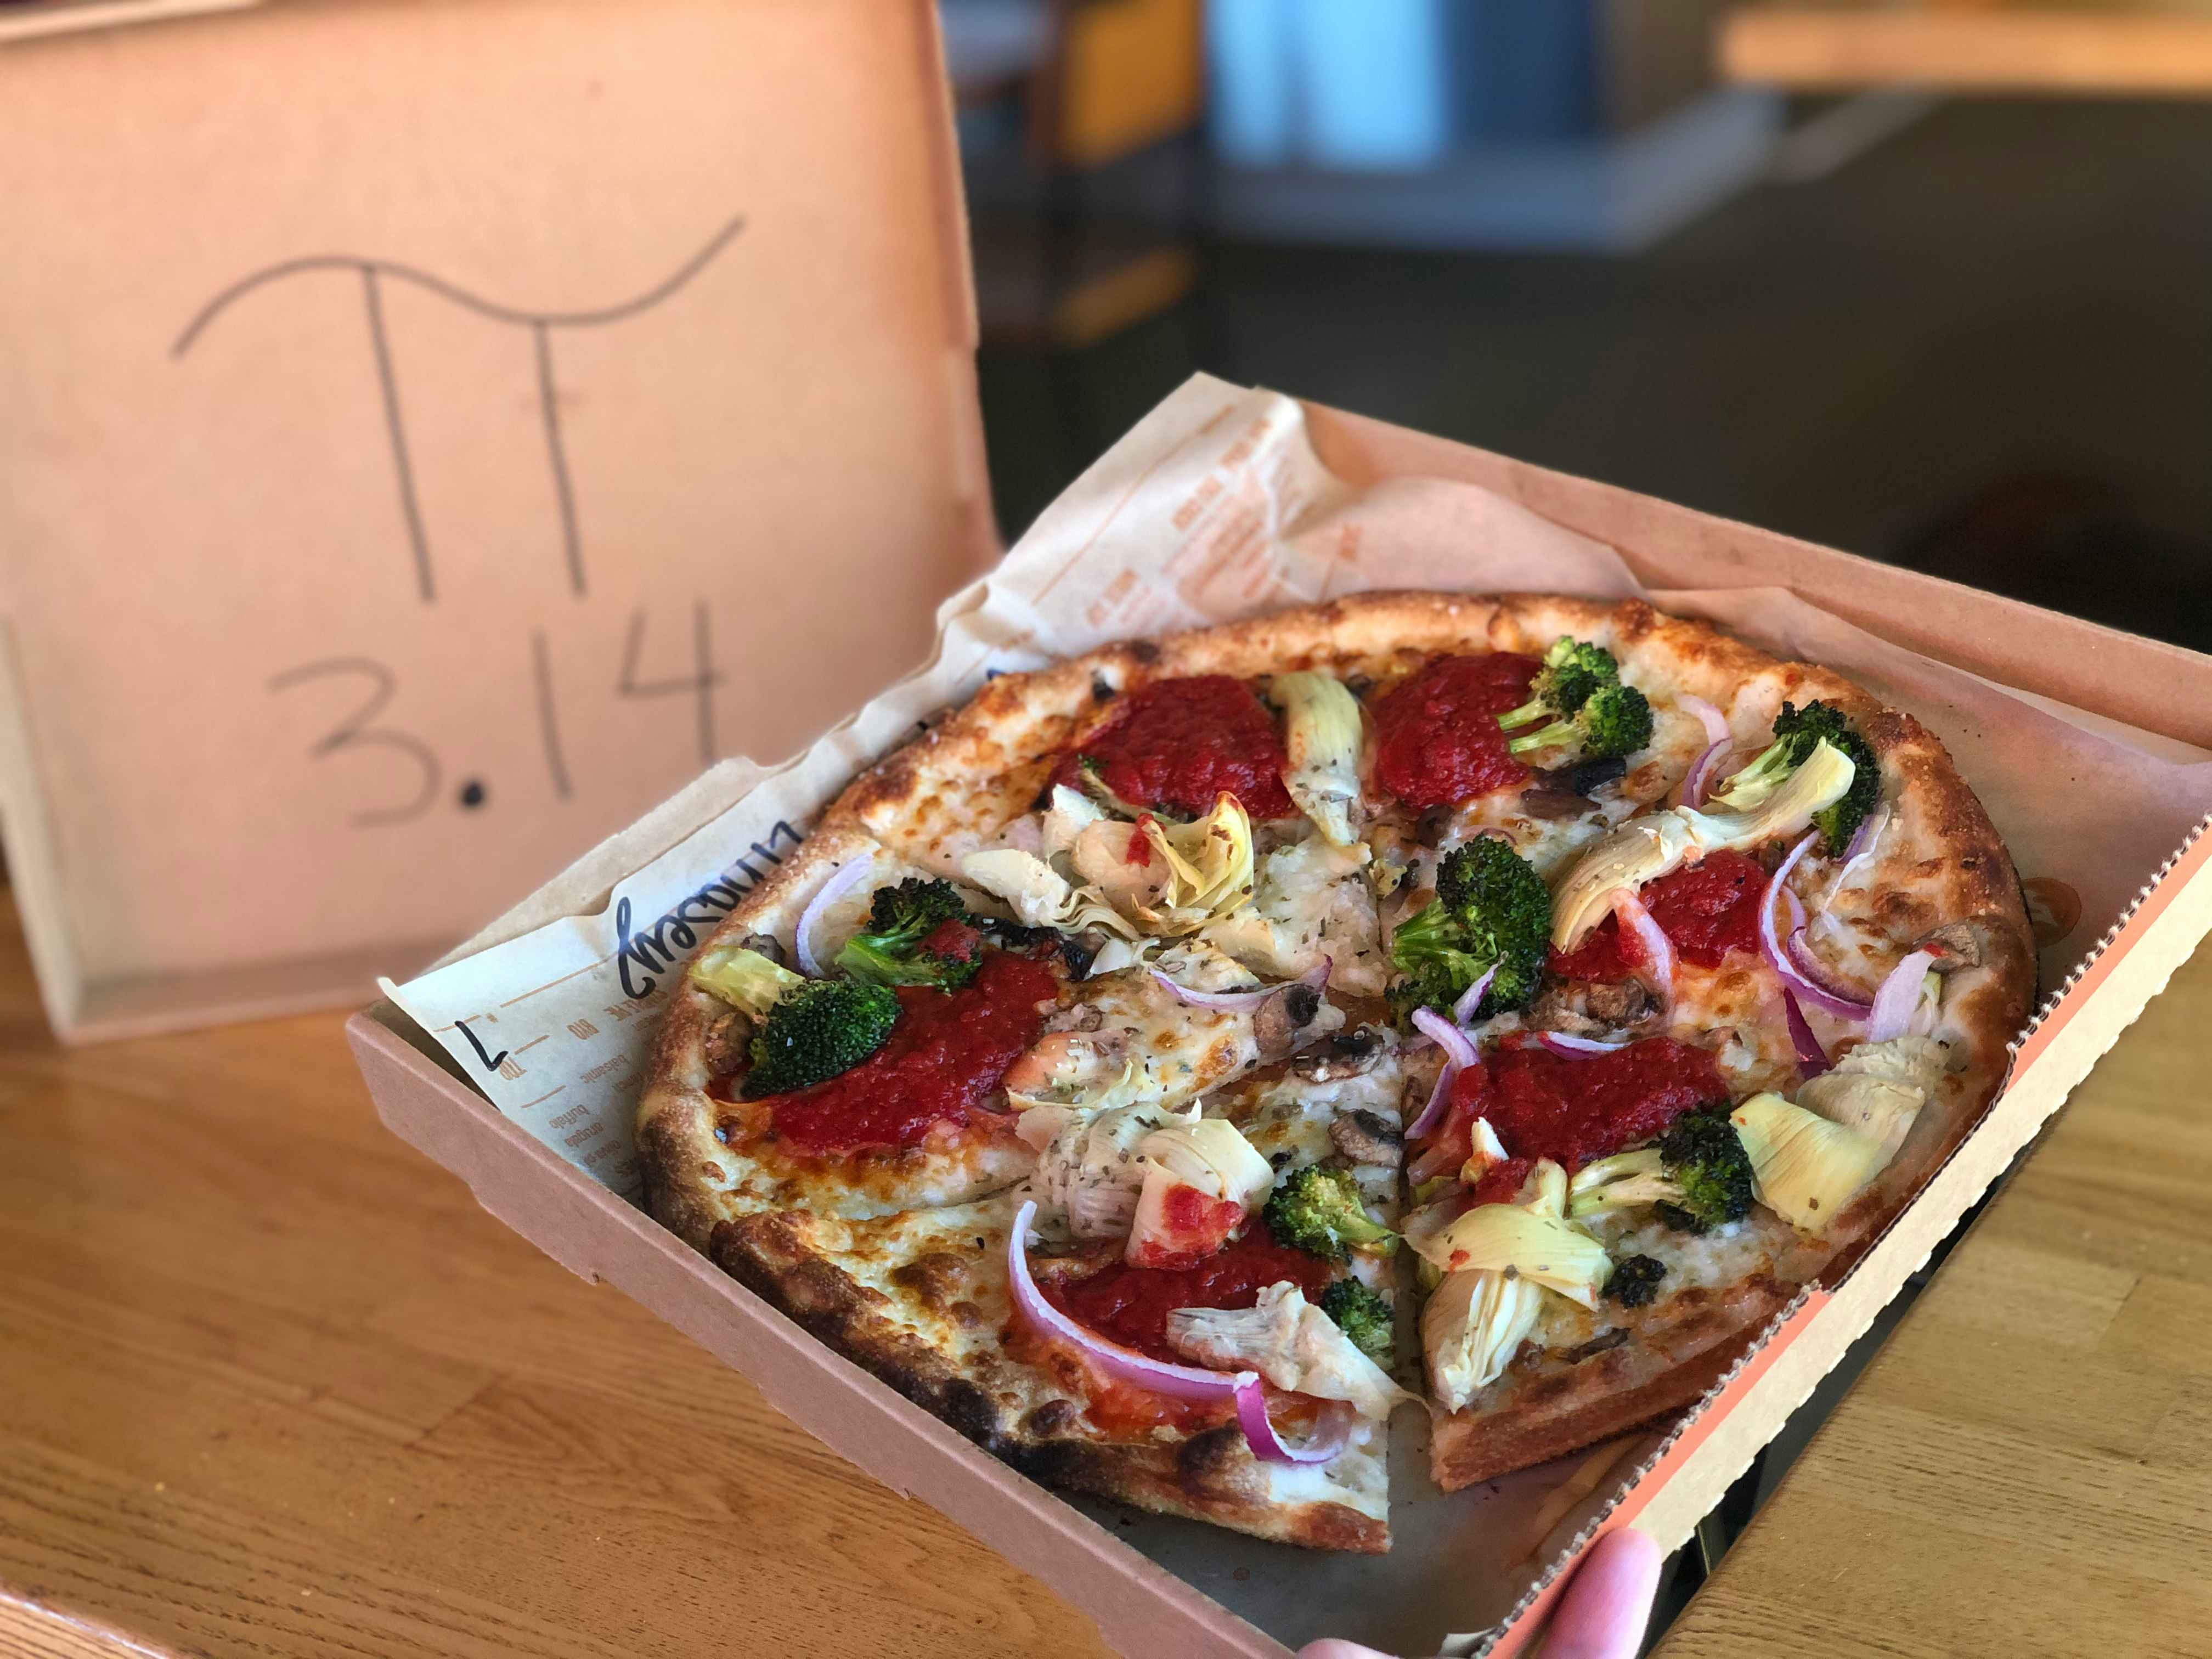 A Blaze pizza being held up inside of a box with no top. The top is displayed in the background with the Pi symbol and 